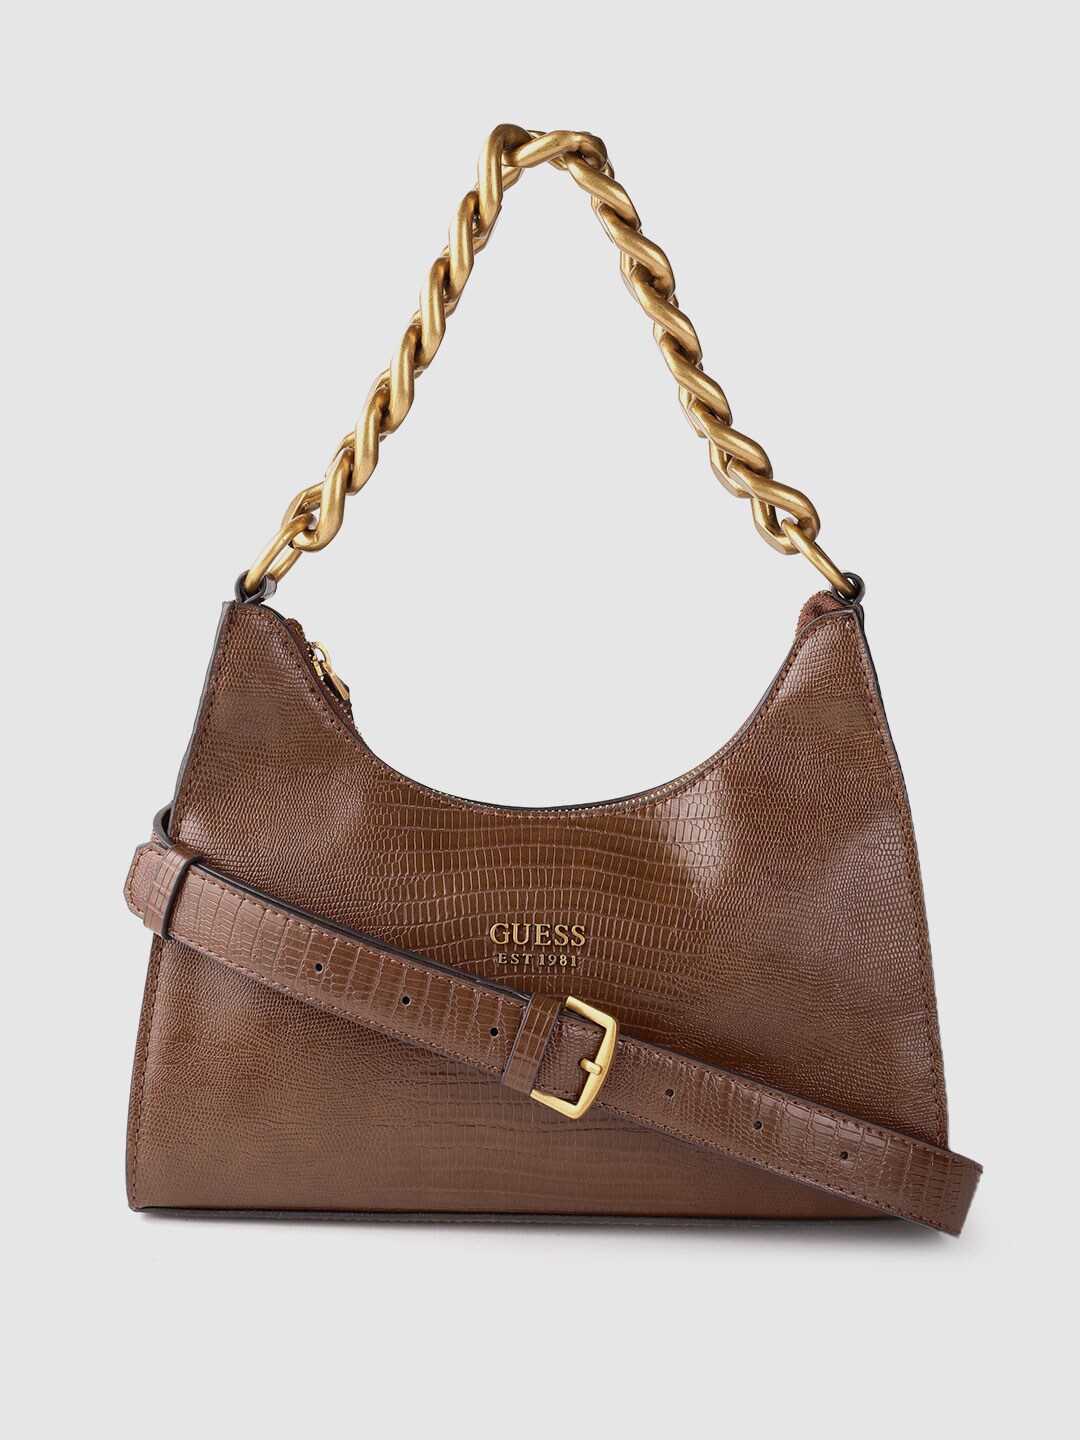 GUESS Brown Textured PU Shopper Shoulder Bag Price in India